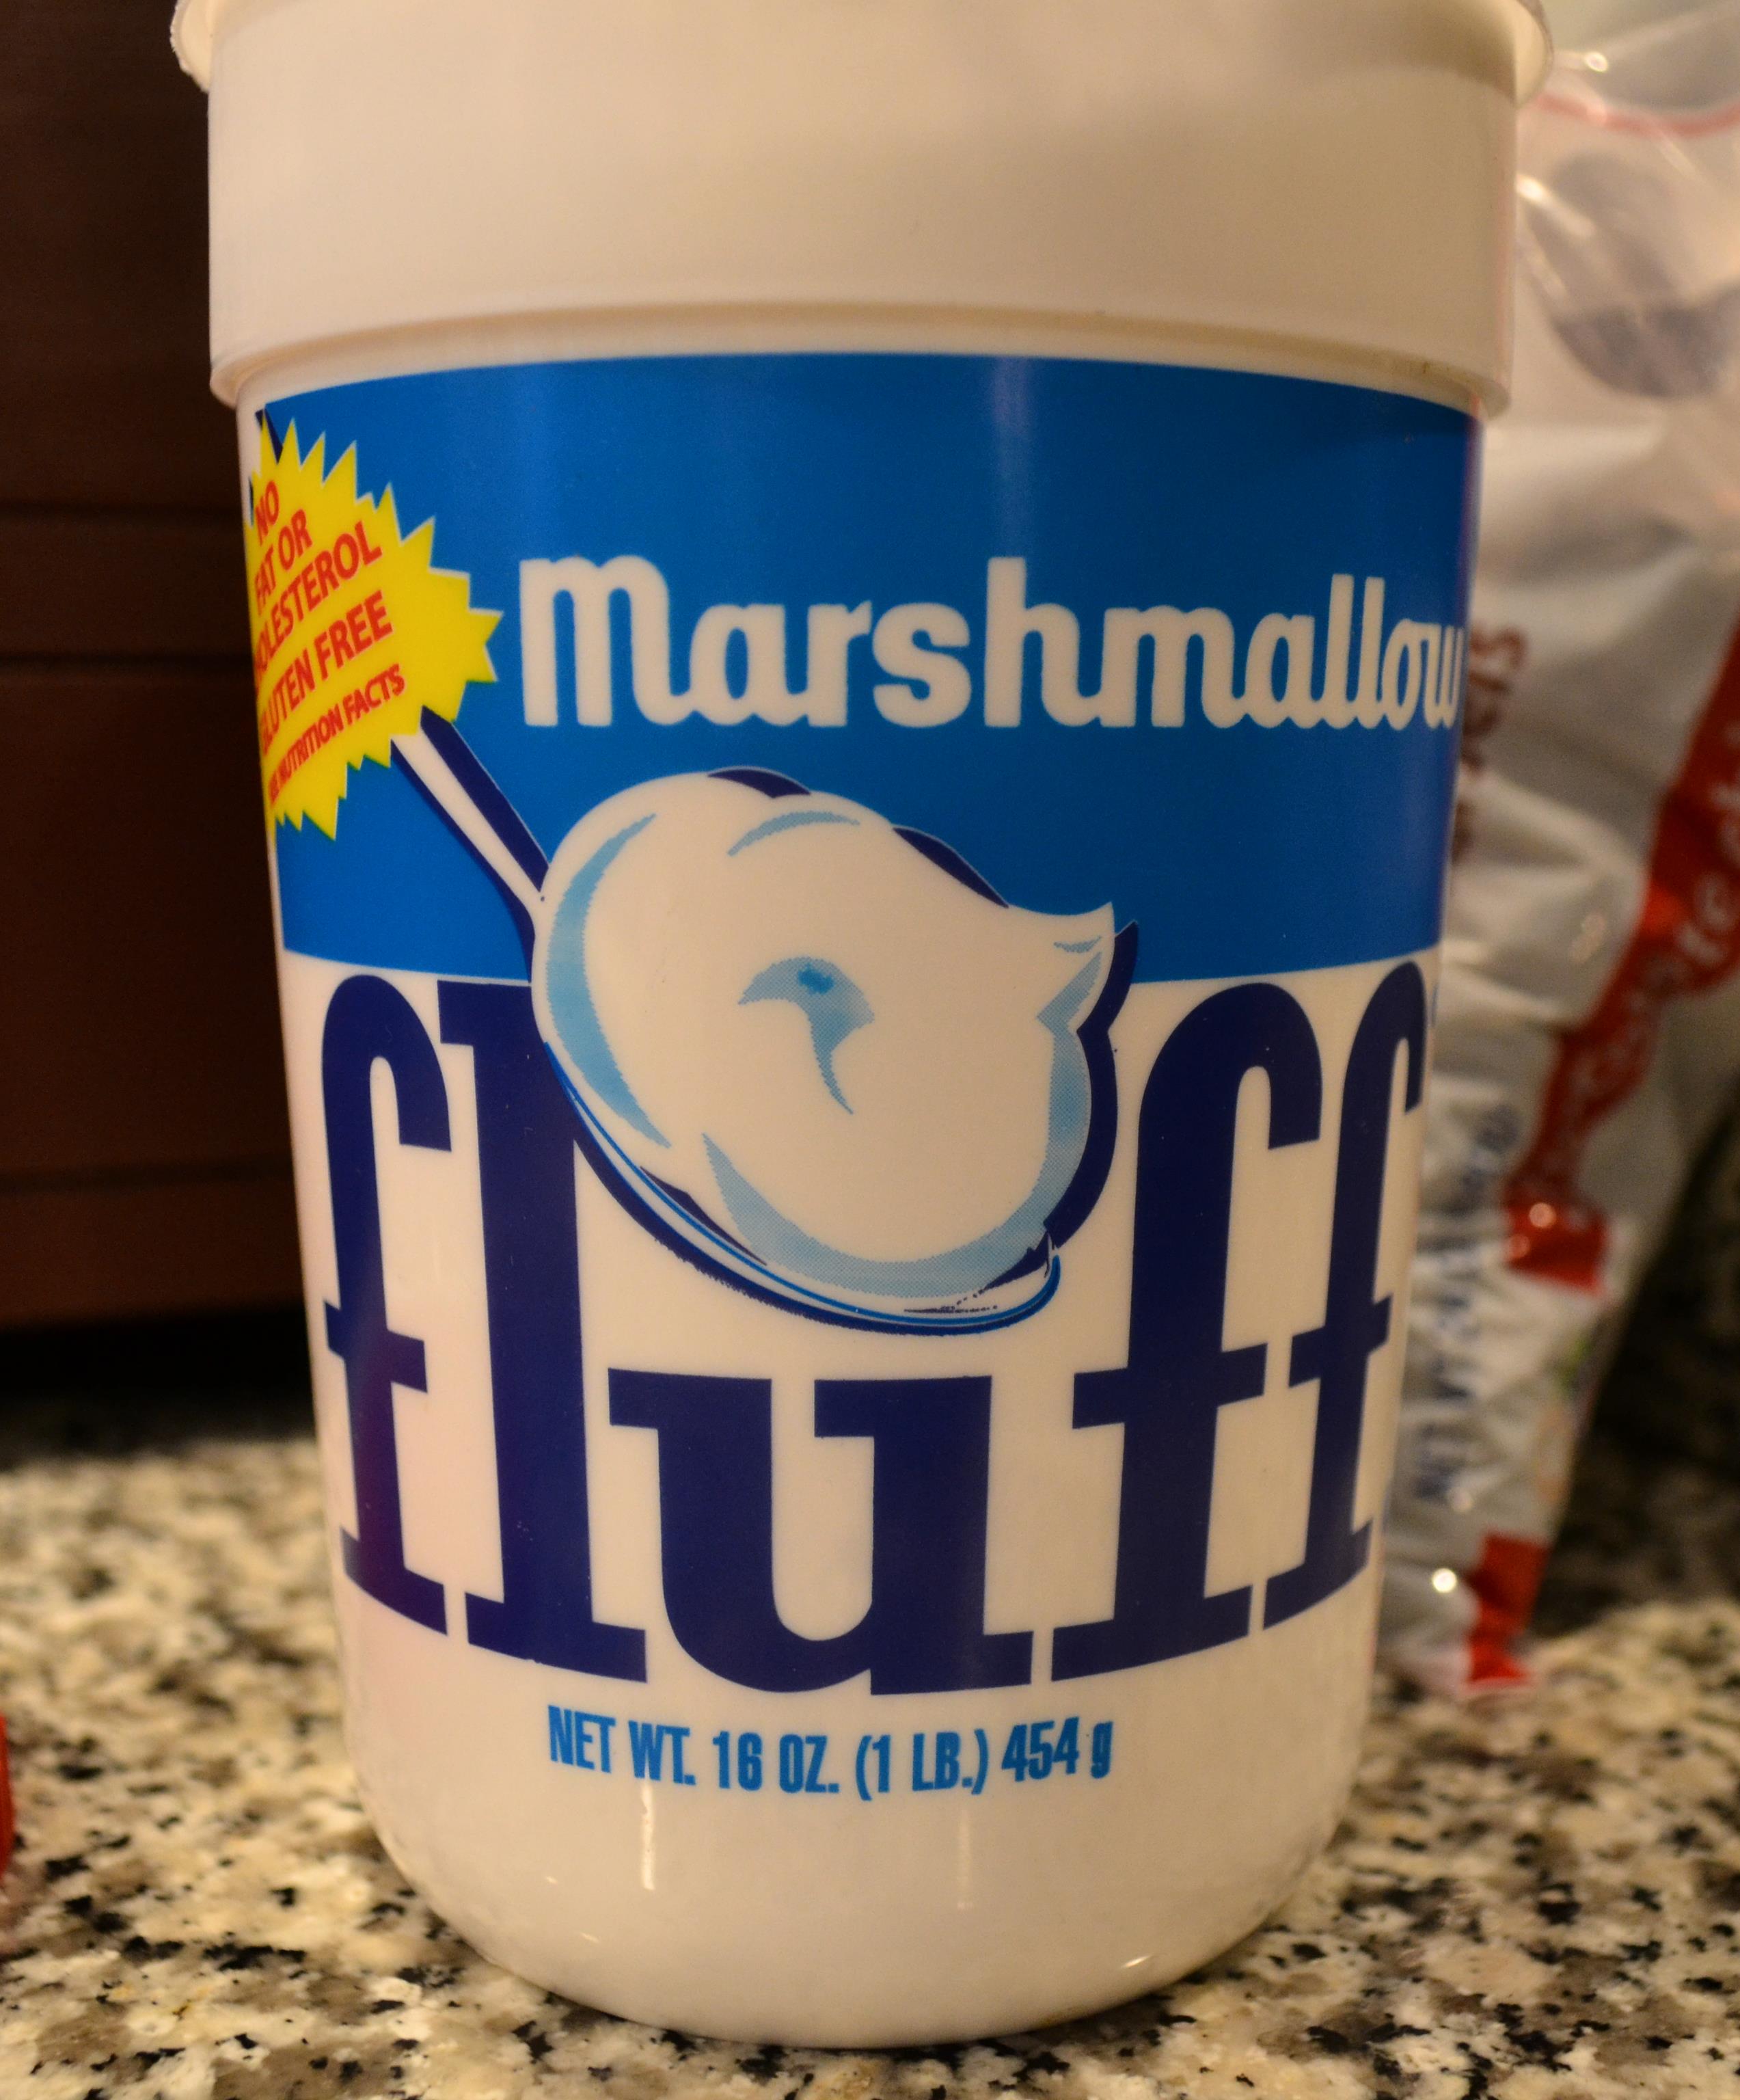 Marshmallow Fluff and Never Fail Fudge (Durkee-Mower Company) - A